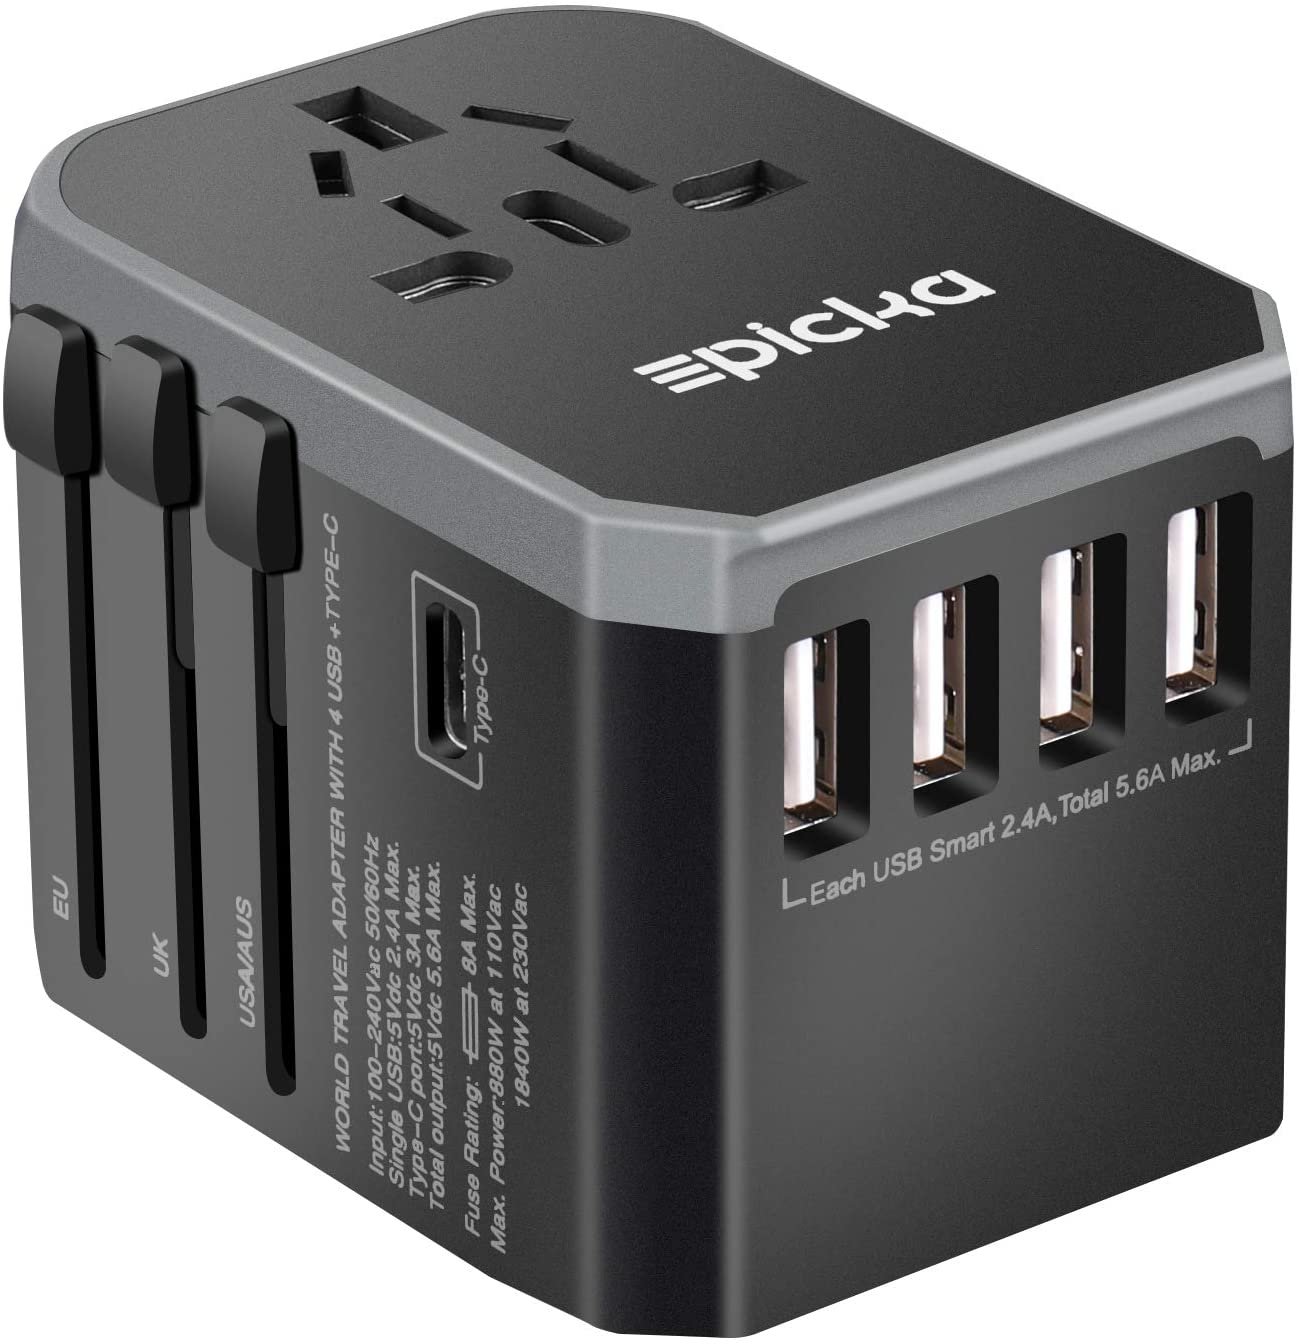 Travel Adapter, best gifts for travelers